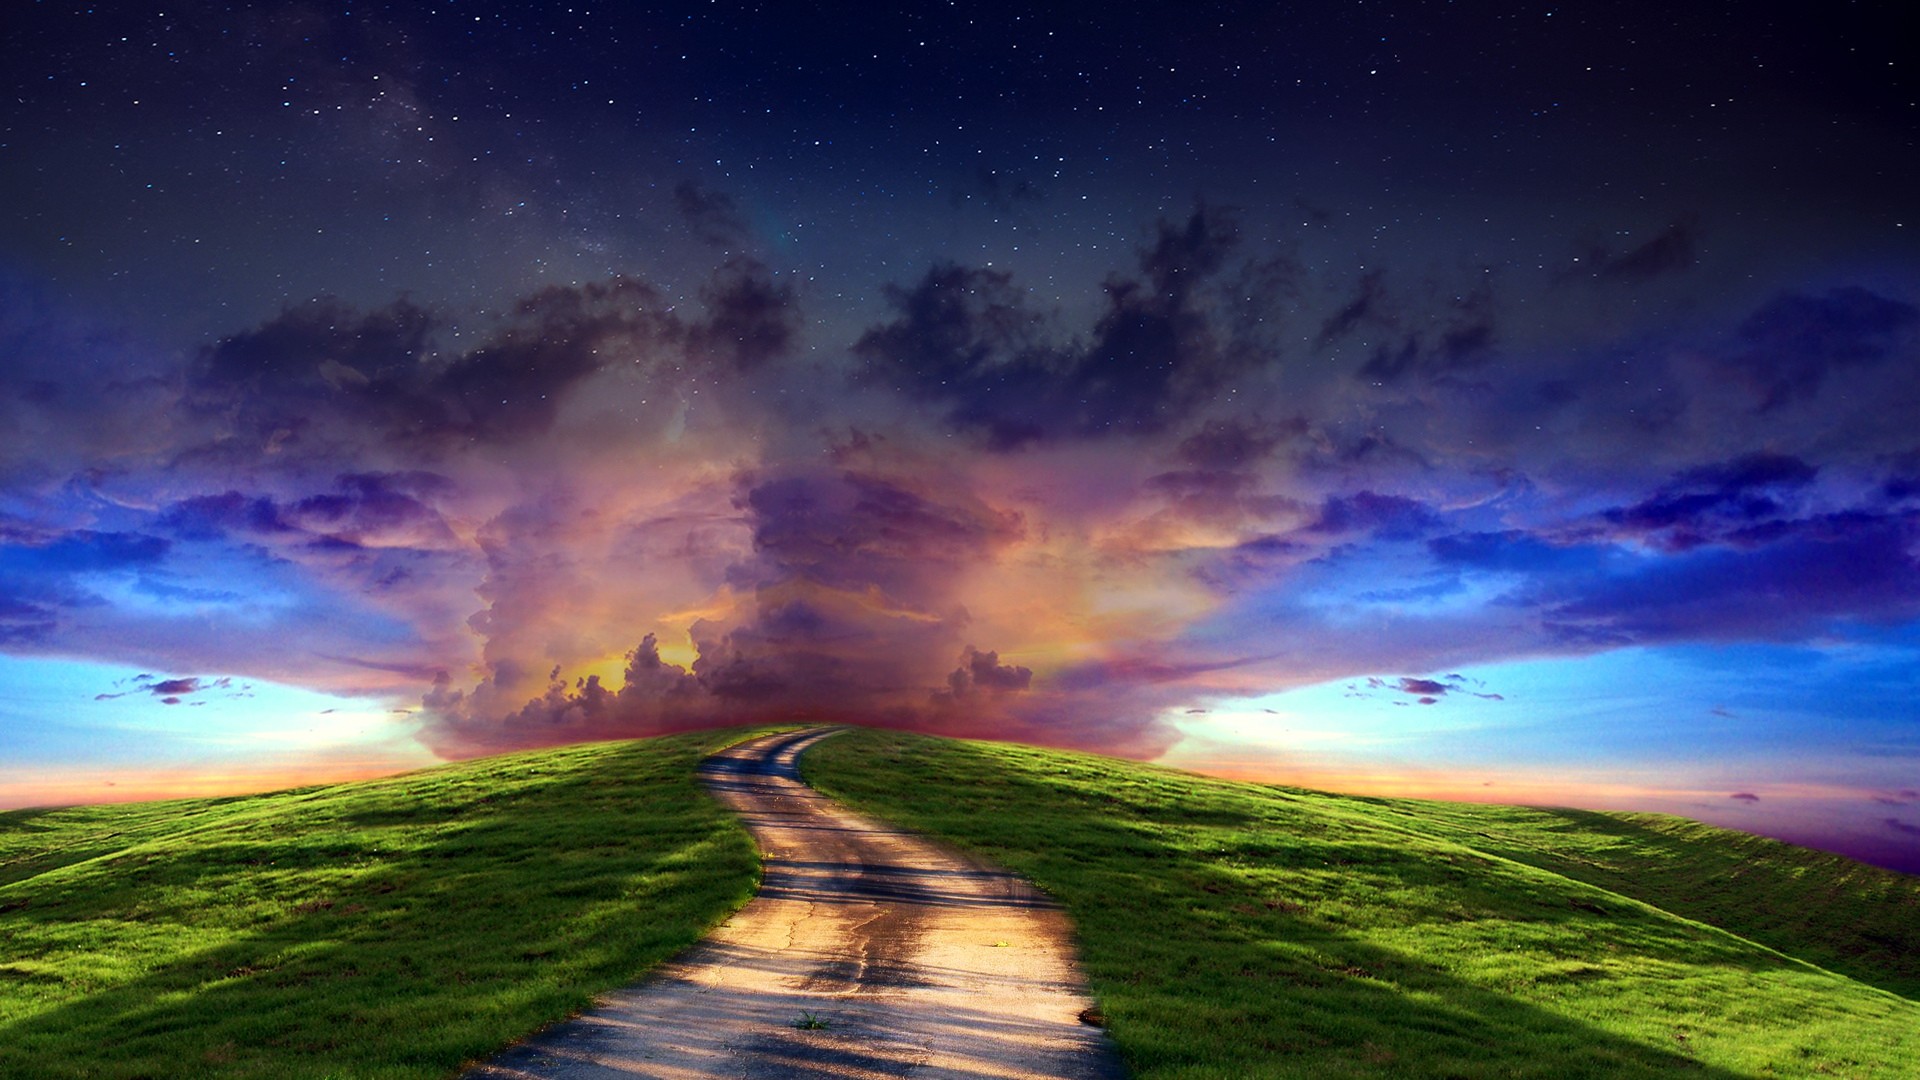 clouds, Sunset, Sky, Stars, Roads, Path, Trail, Landscapes Wallpaper